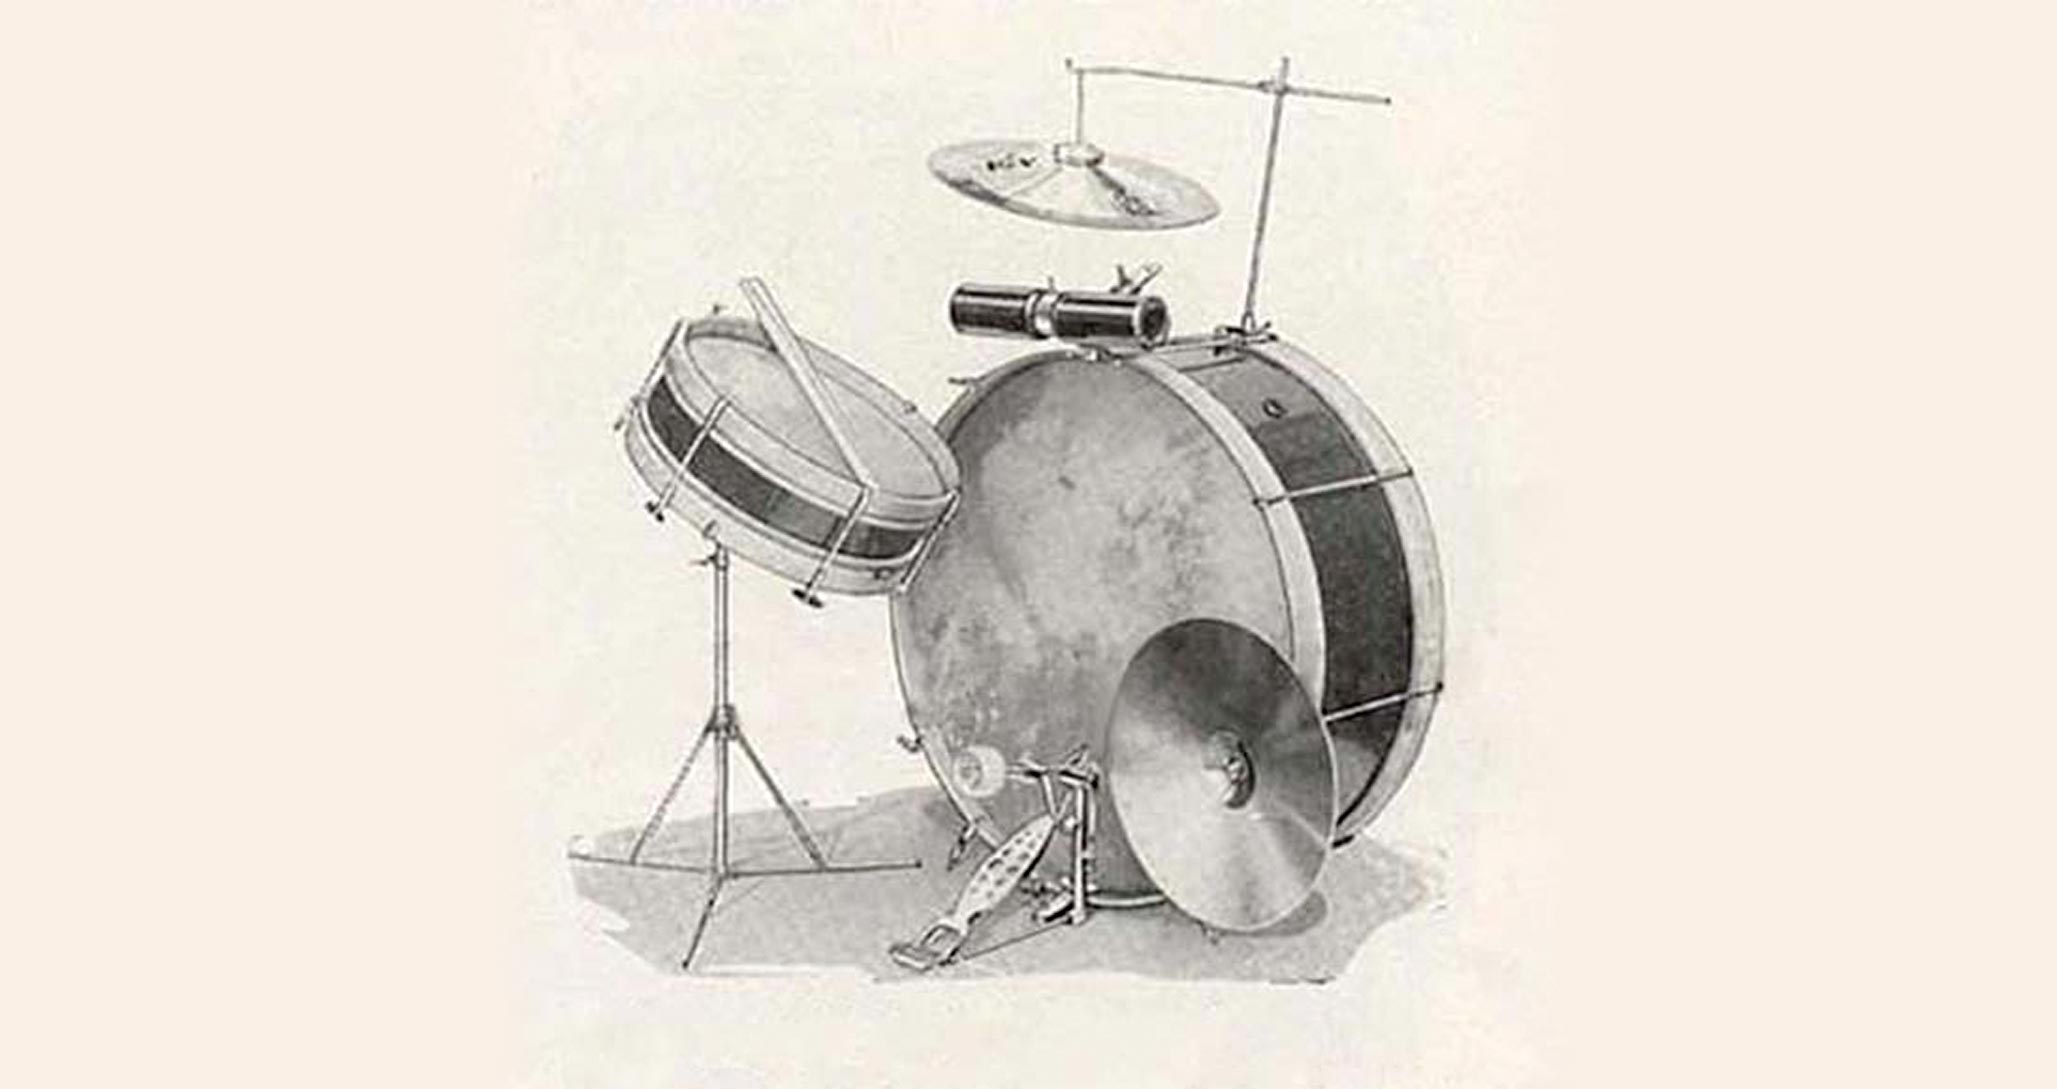 An old drum set